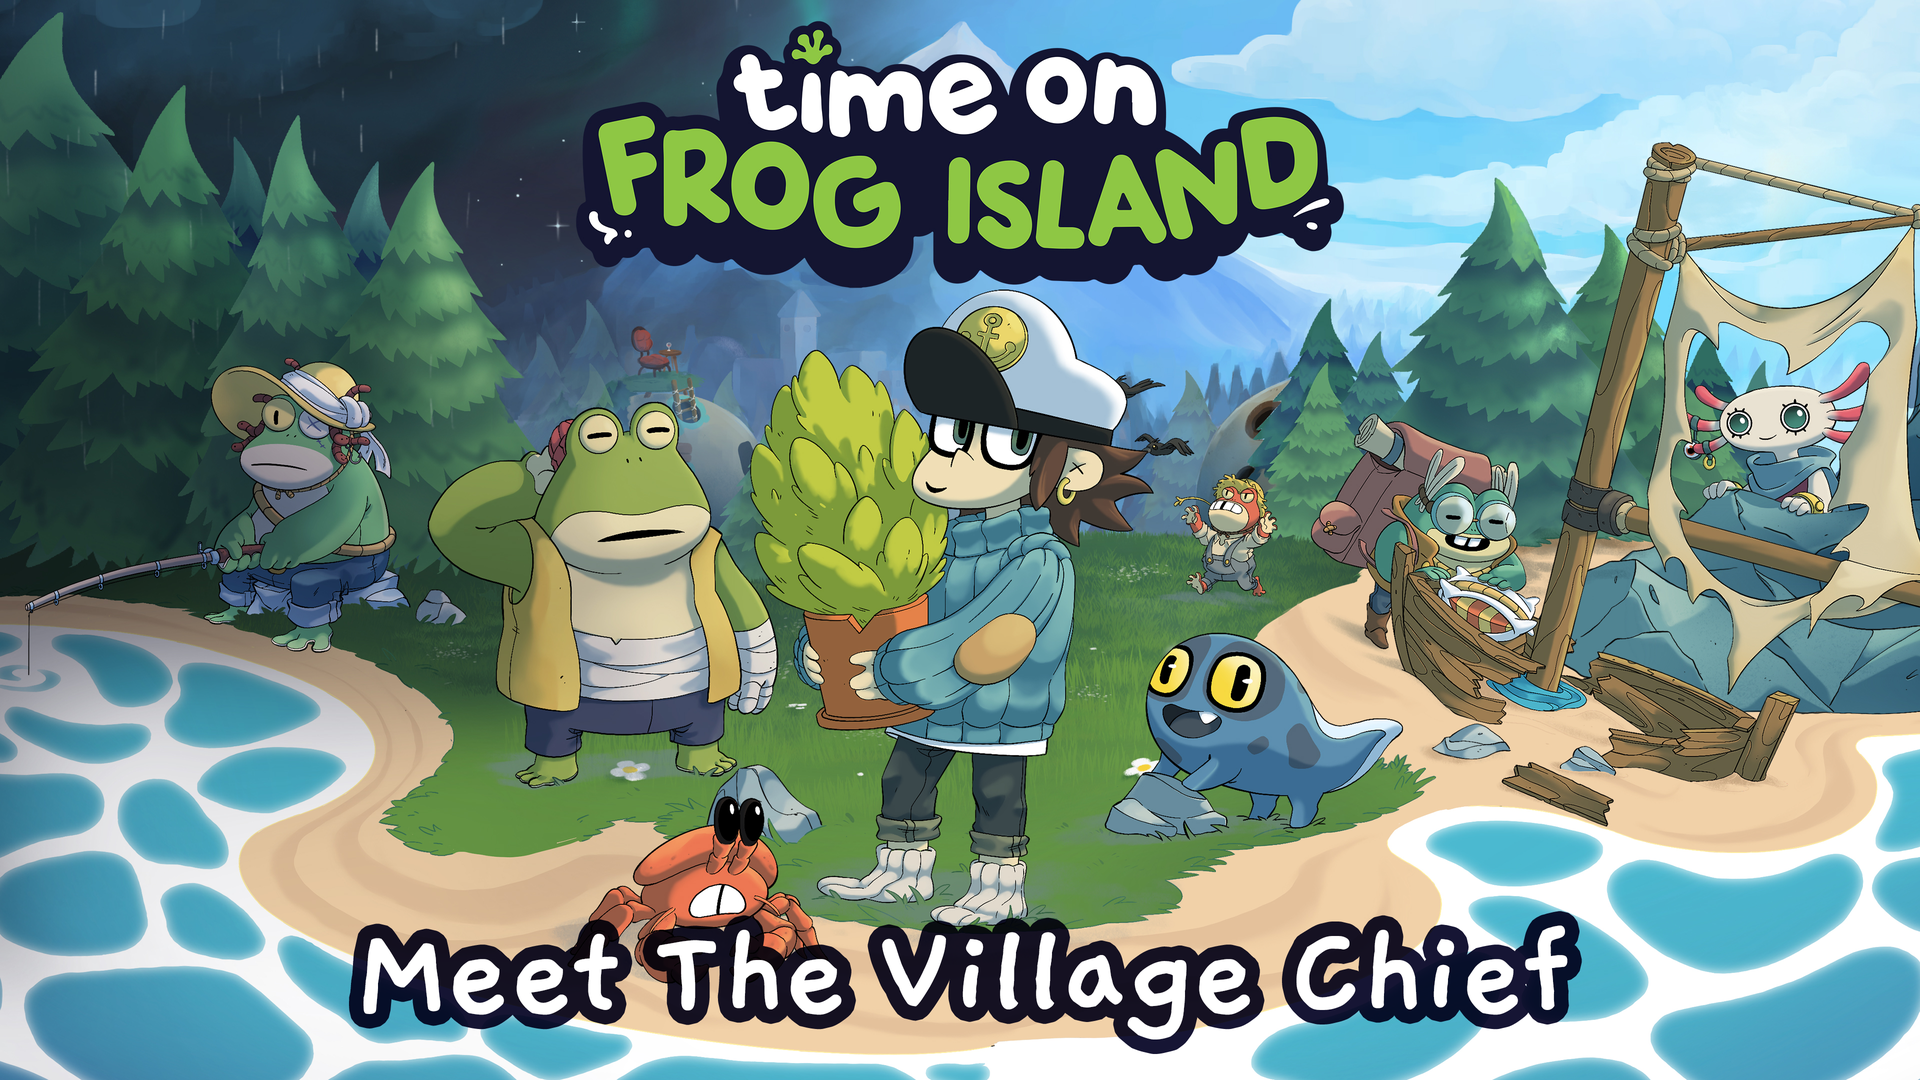 Time on Frog Island - Meet the Village Chief